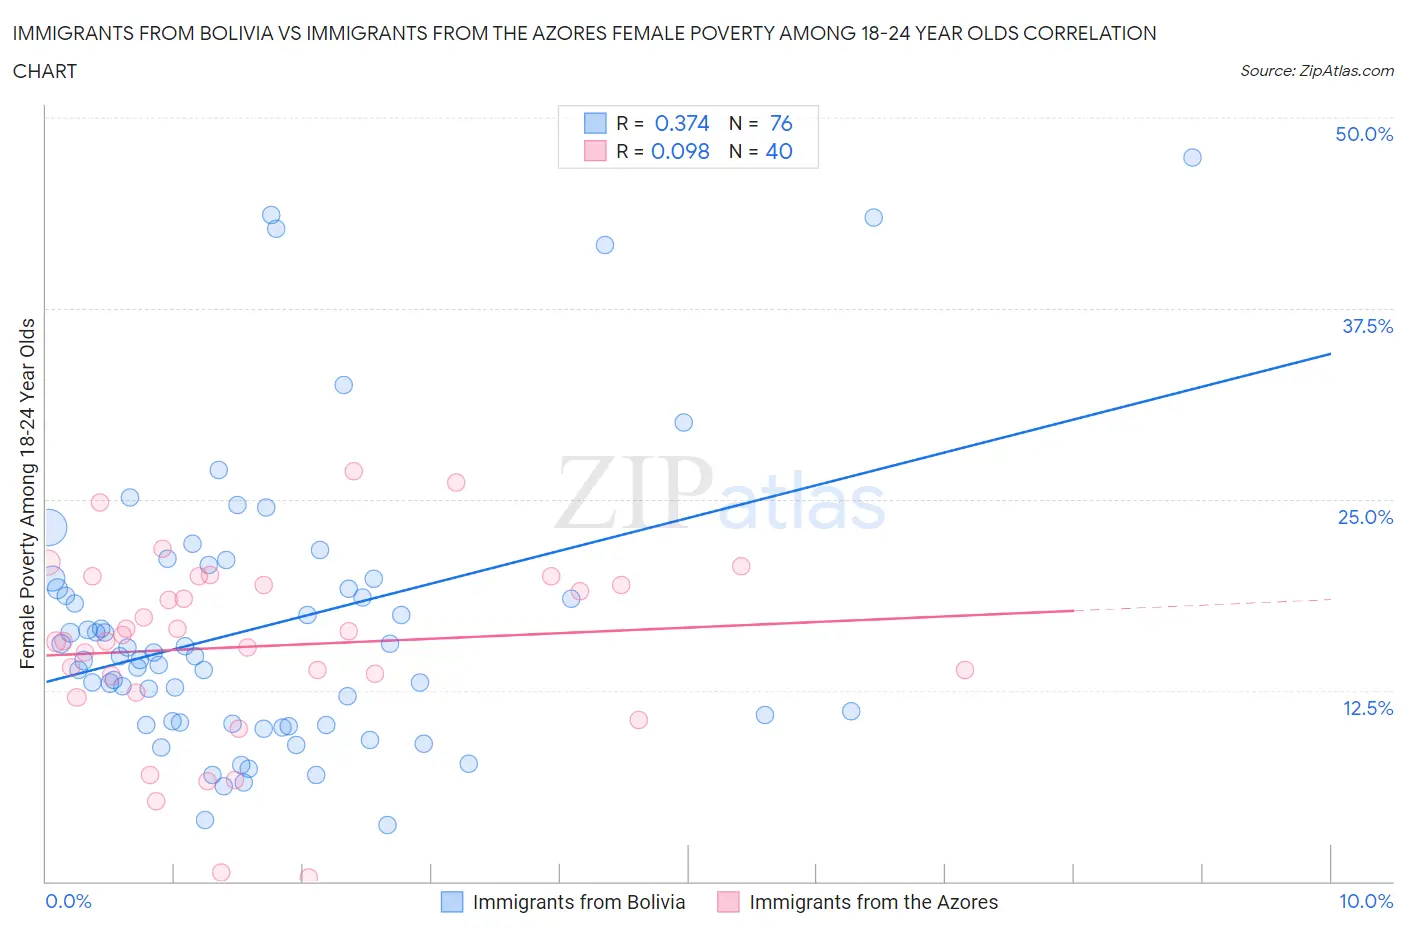 Immigrants from Bolivia vs Immigrants from the Azores Female Poverty Among 18-24 Year Olds